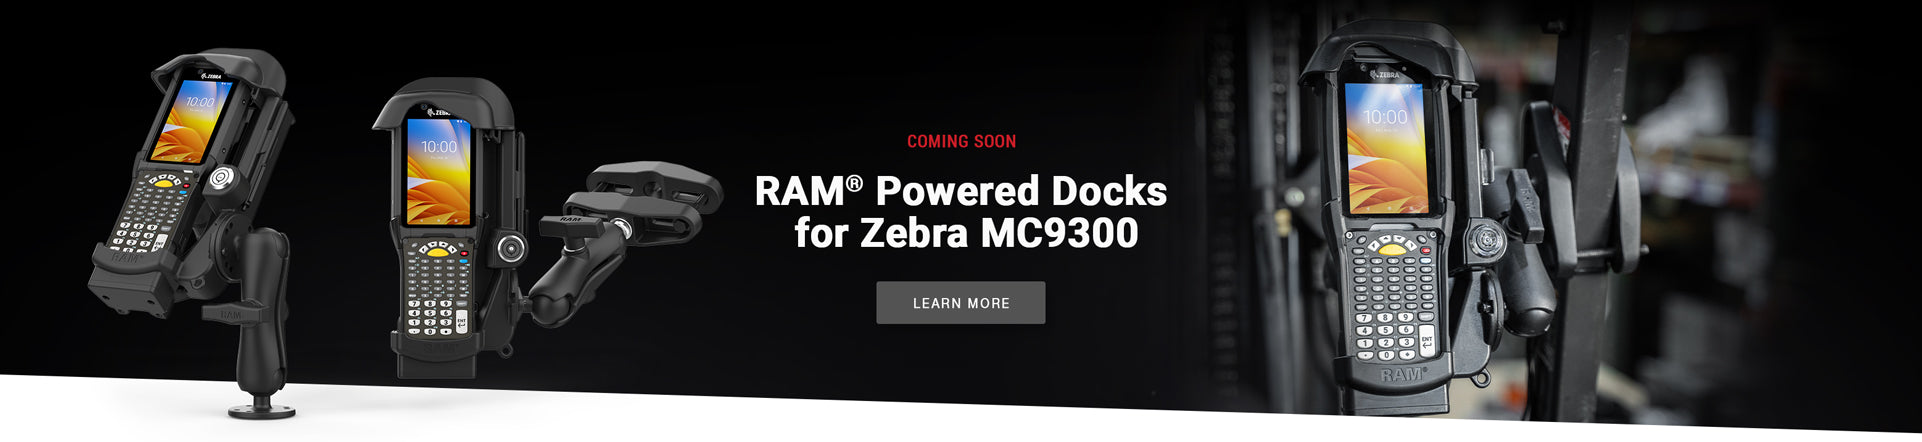 Homepage Image banner featuring RAM docks coming soon for Zebra MC9300